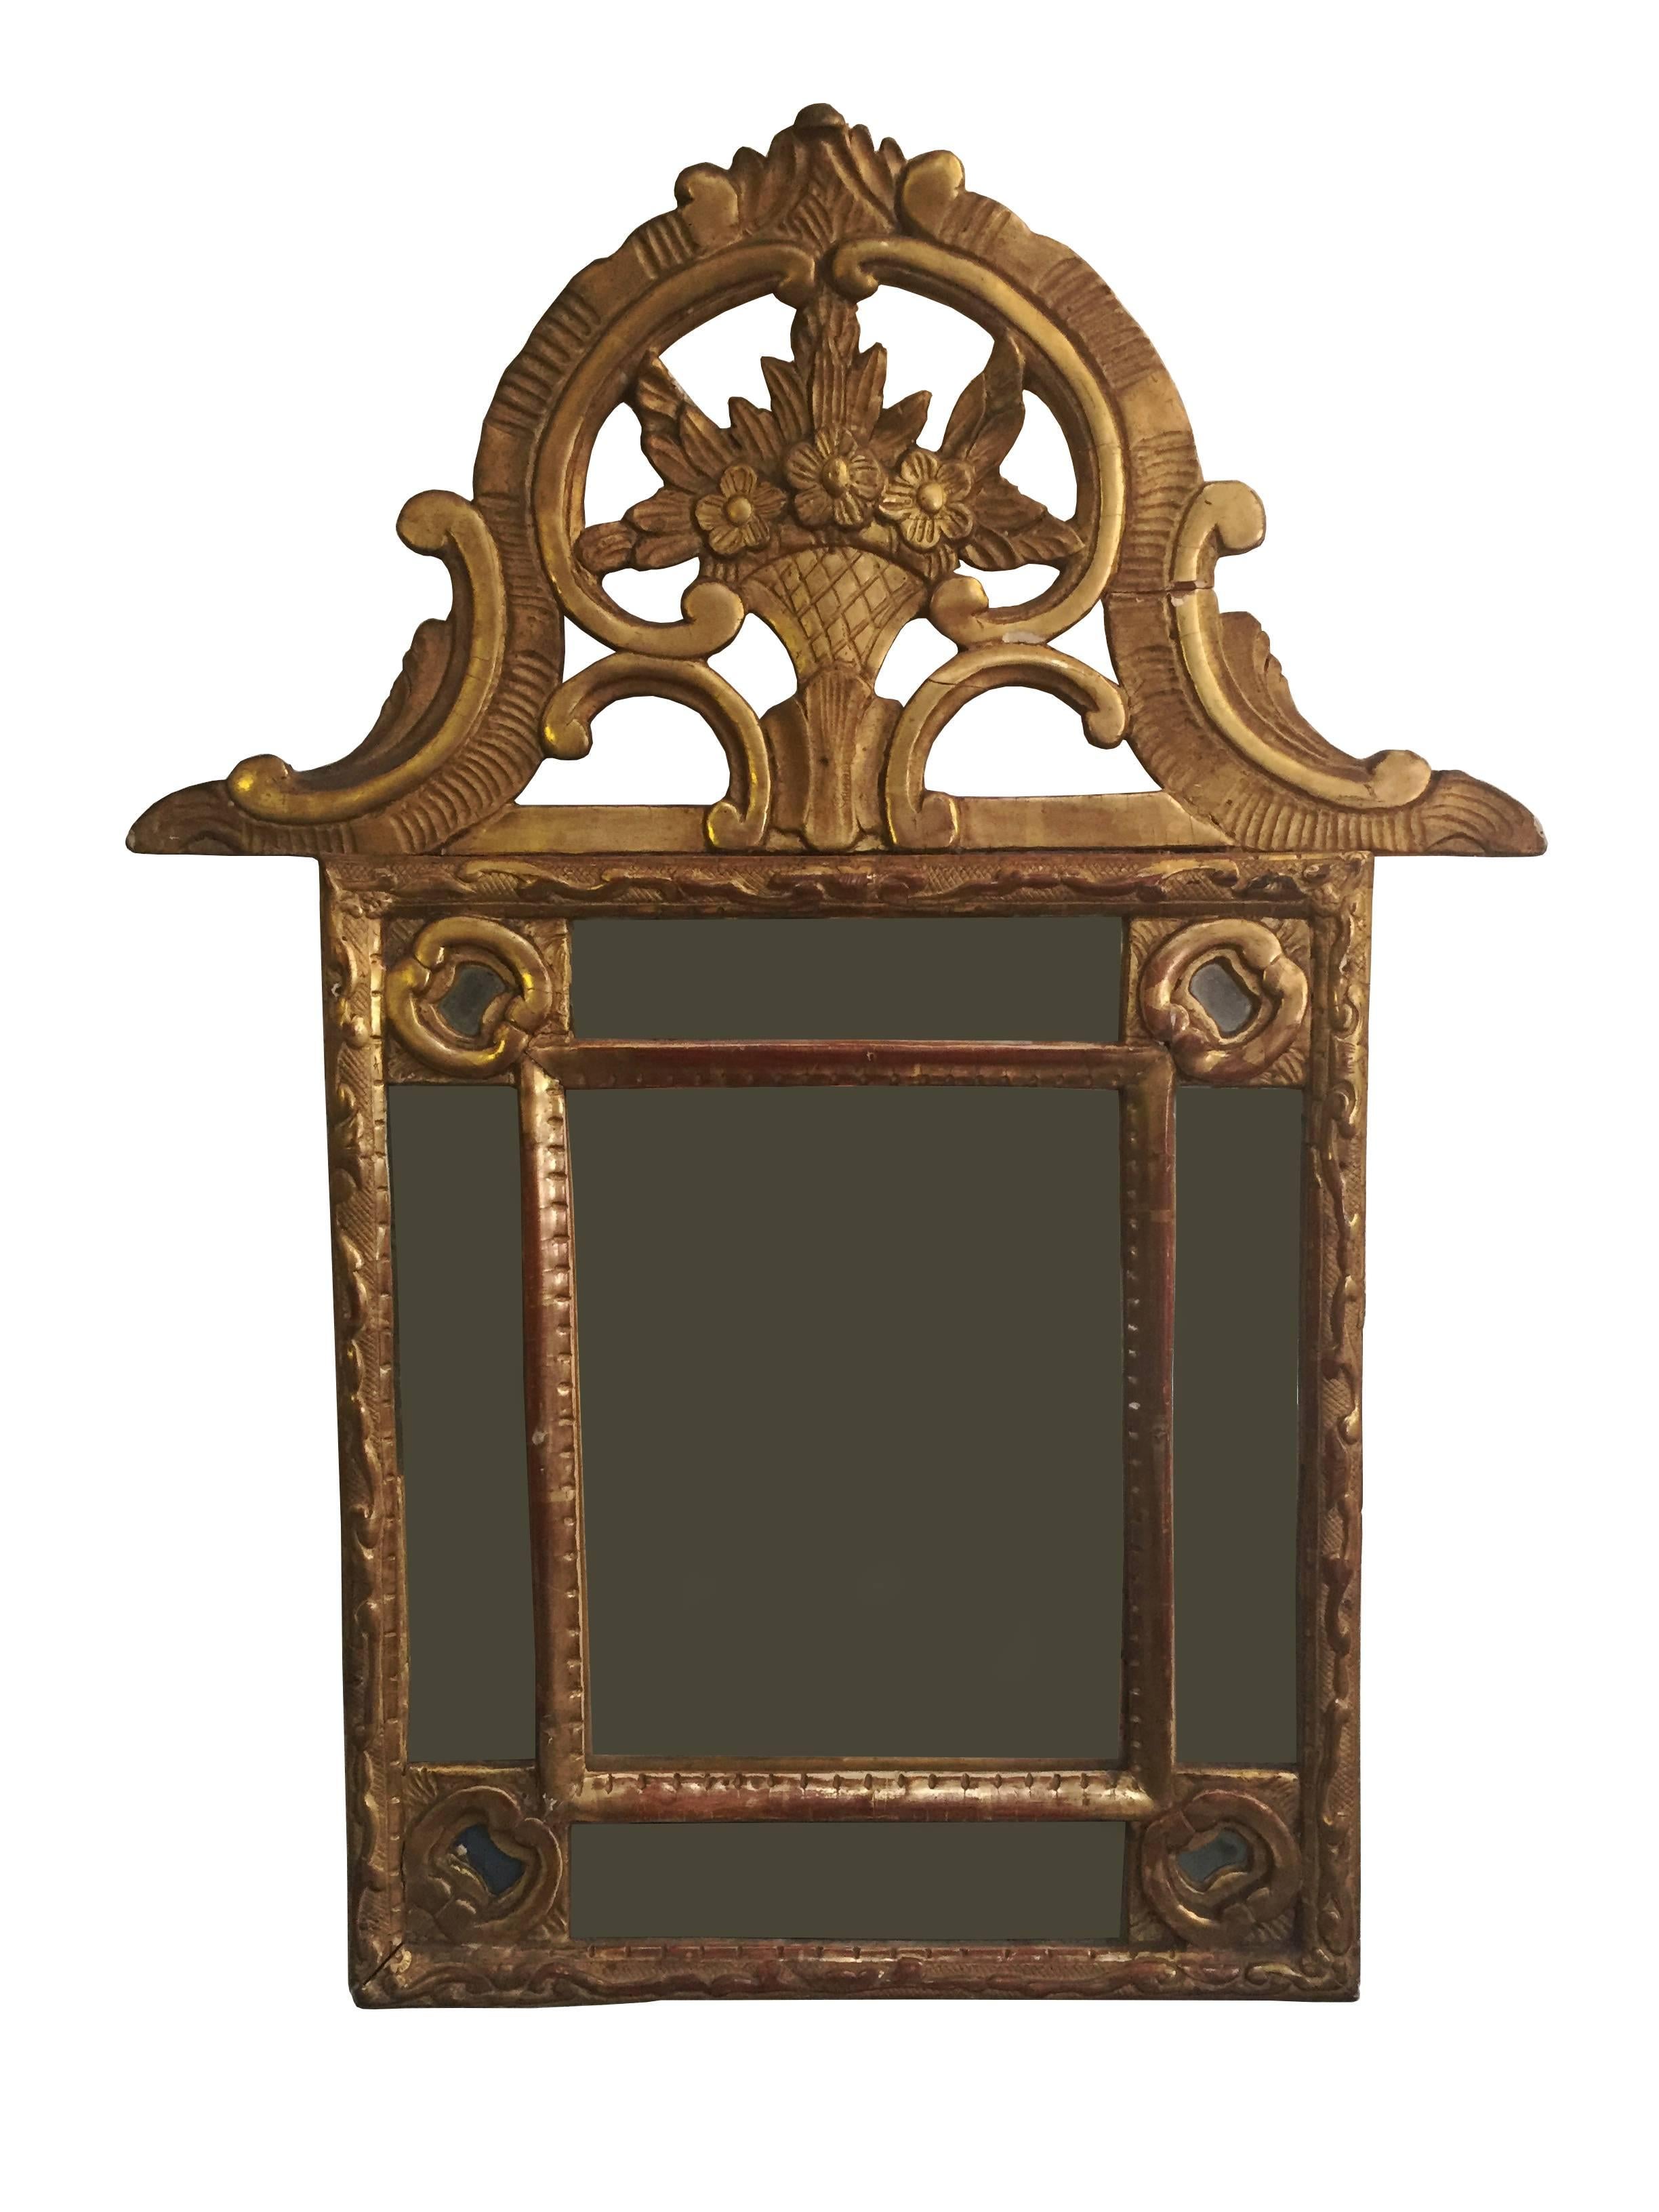 Antique 18th Century French wood carved and gilt mirror

The rectangular frame is bordered with original silver plate glass with beautifully carved edging. The pediment contained and bouquet of flowers all with original gilding in good